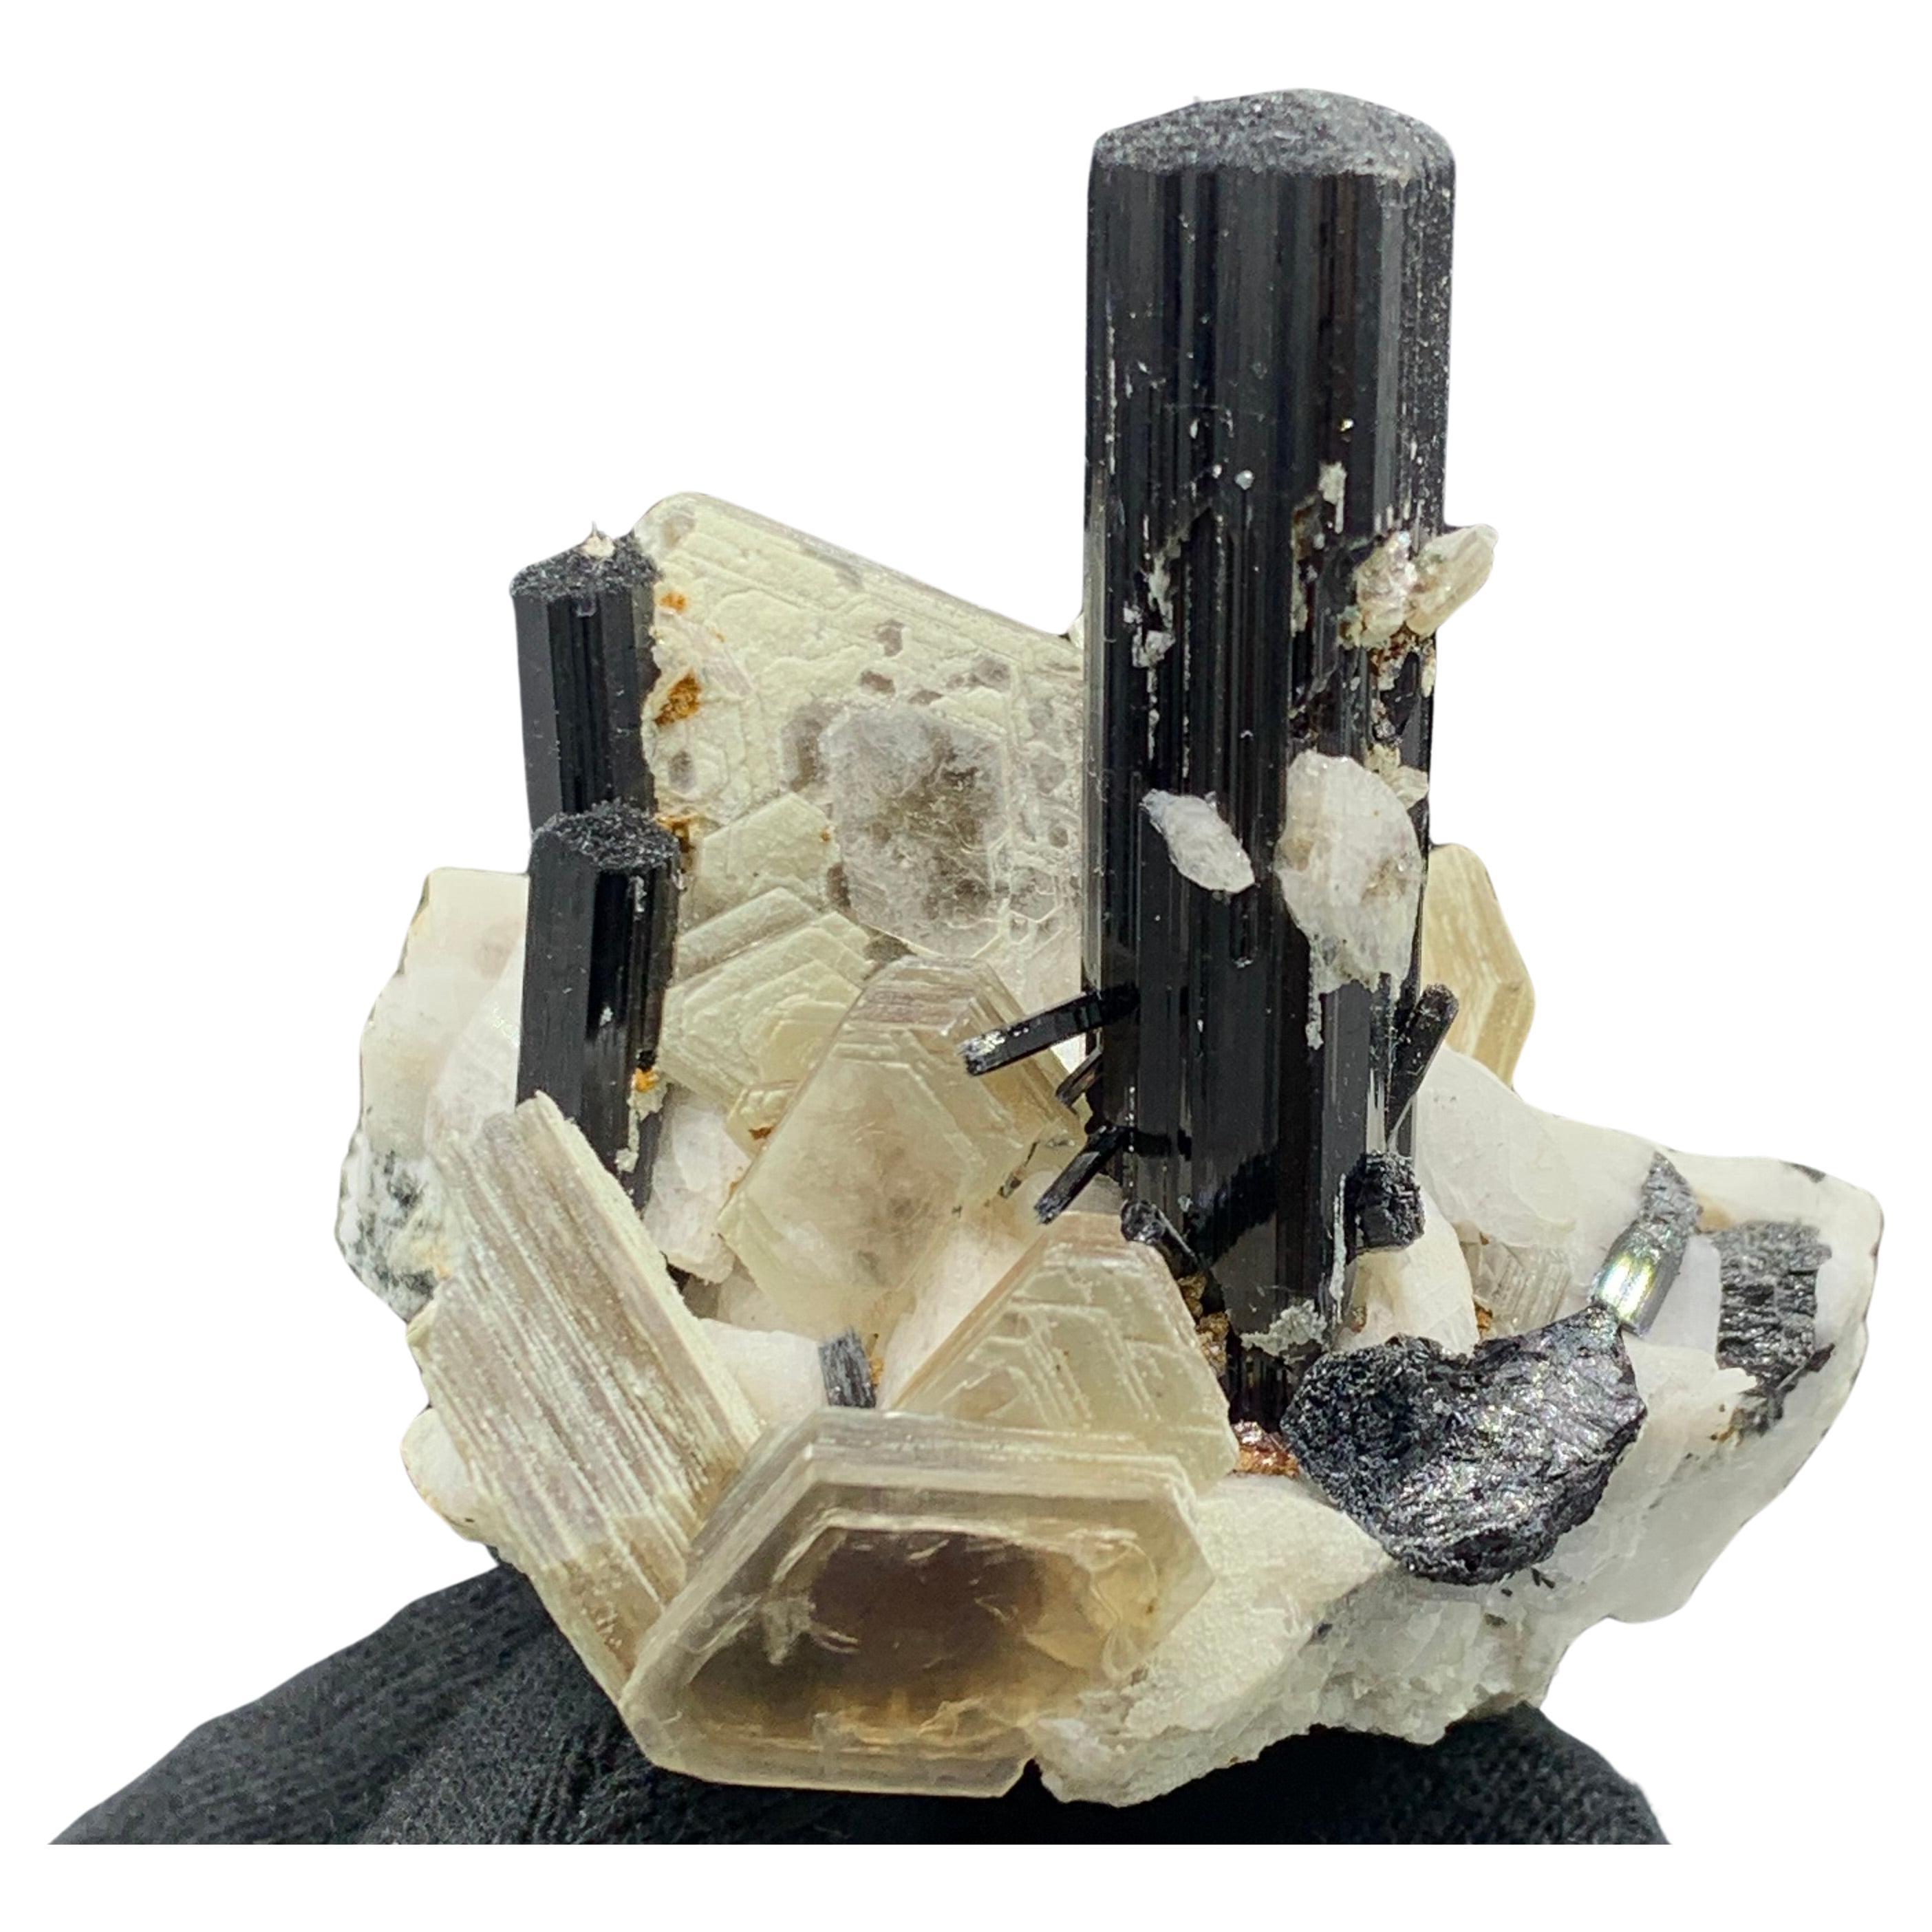 102.07 Gram Black Tourmaline Specimen Attached With Muscovite From Pakistan  For Sale